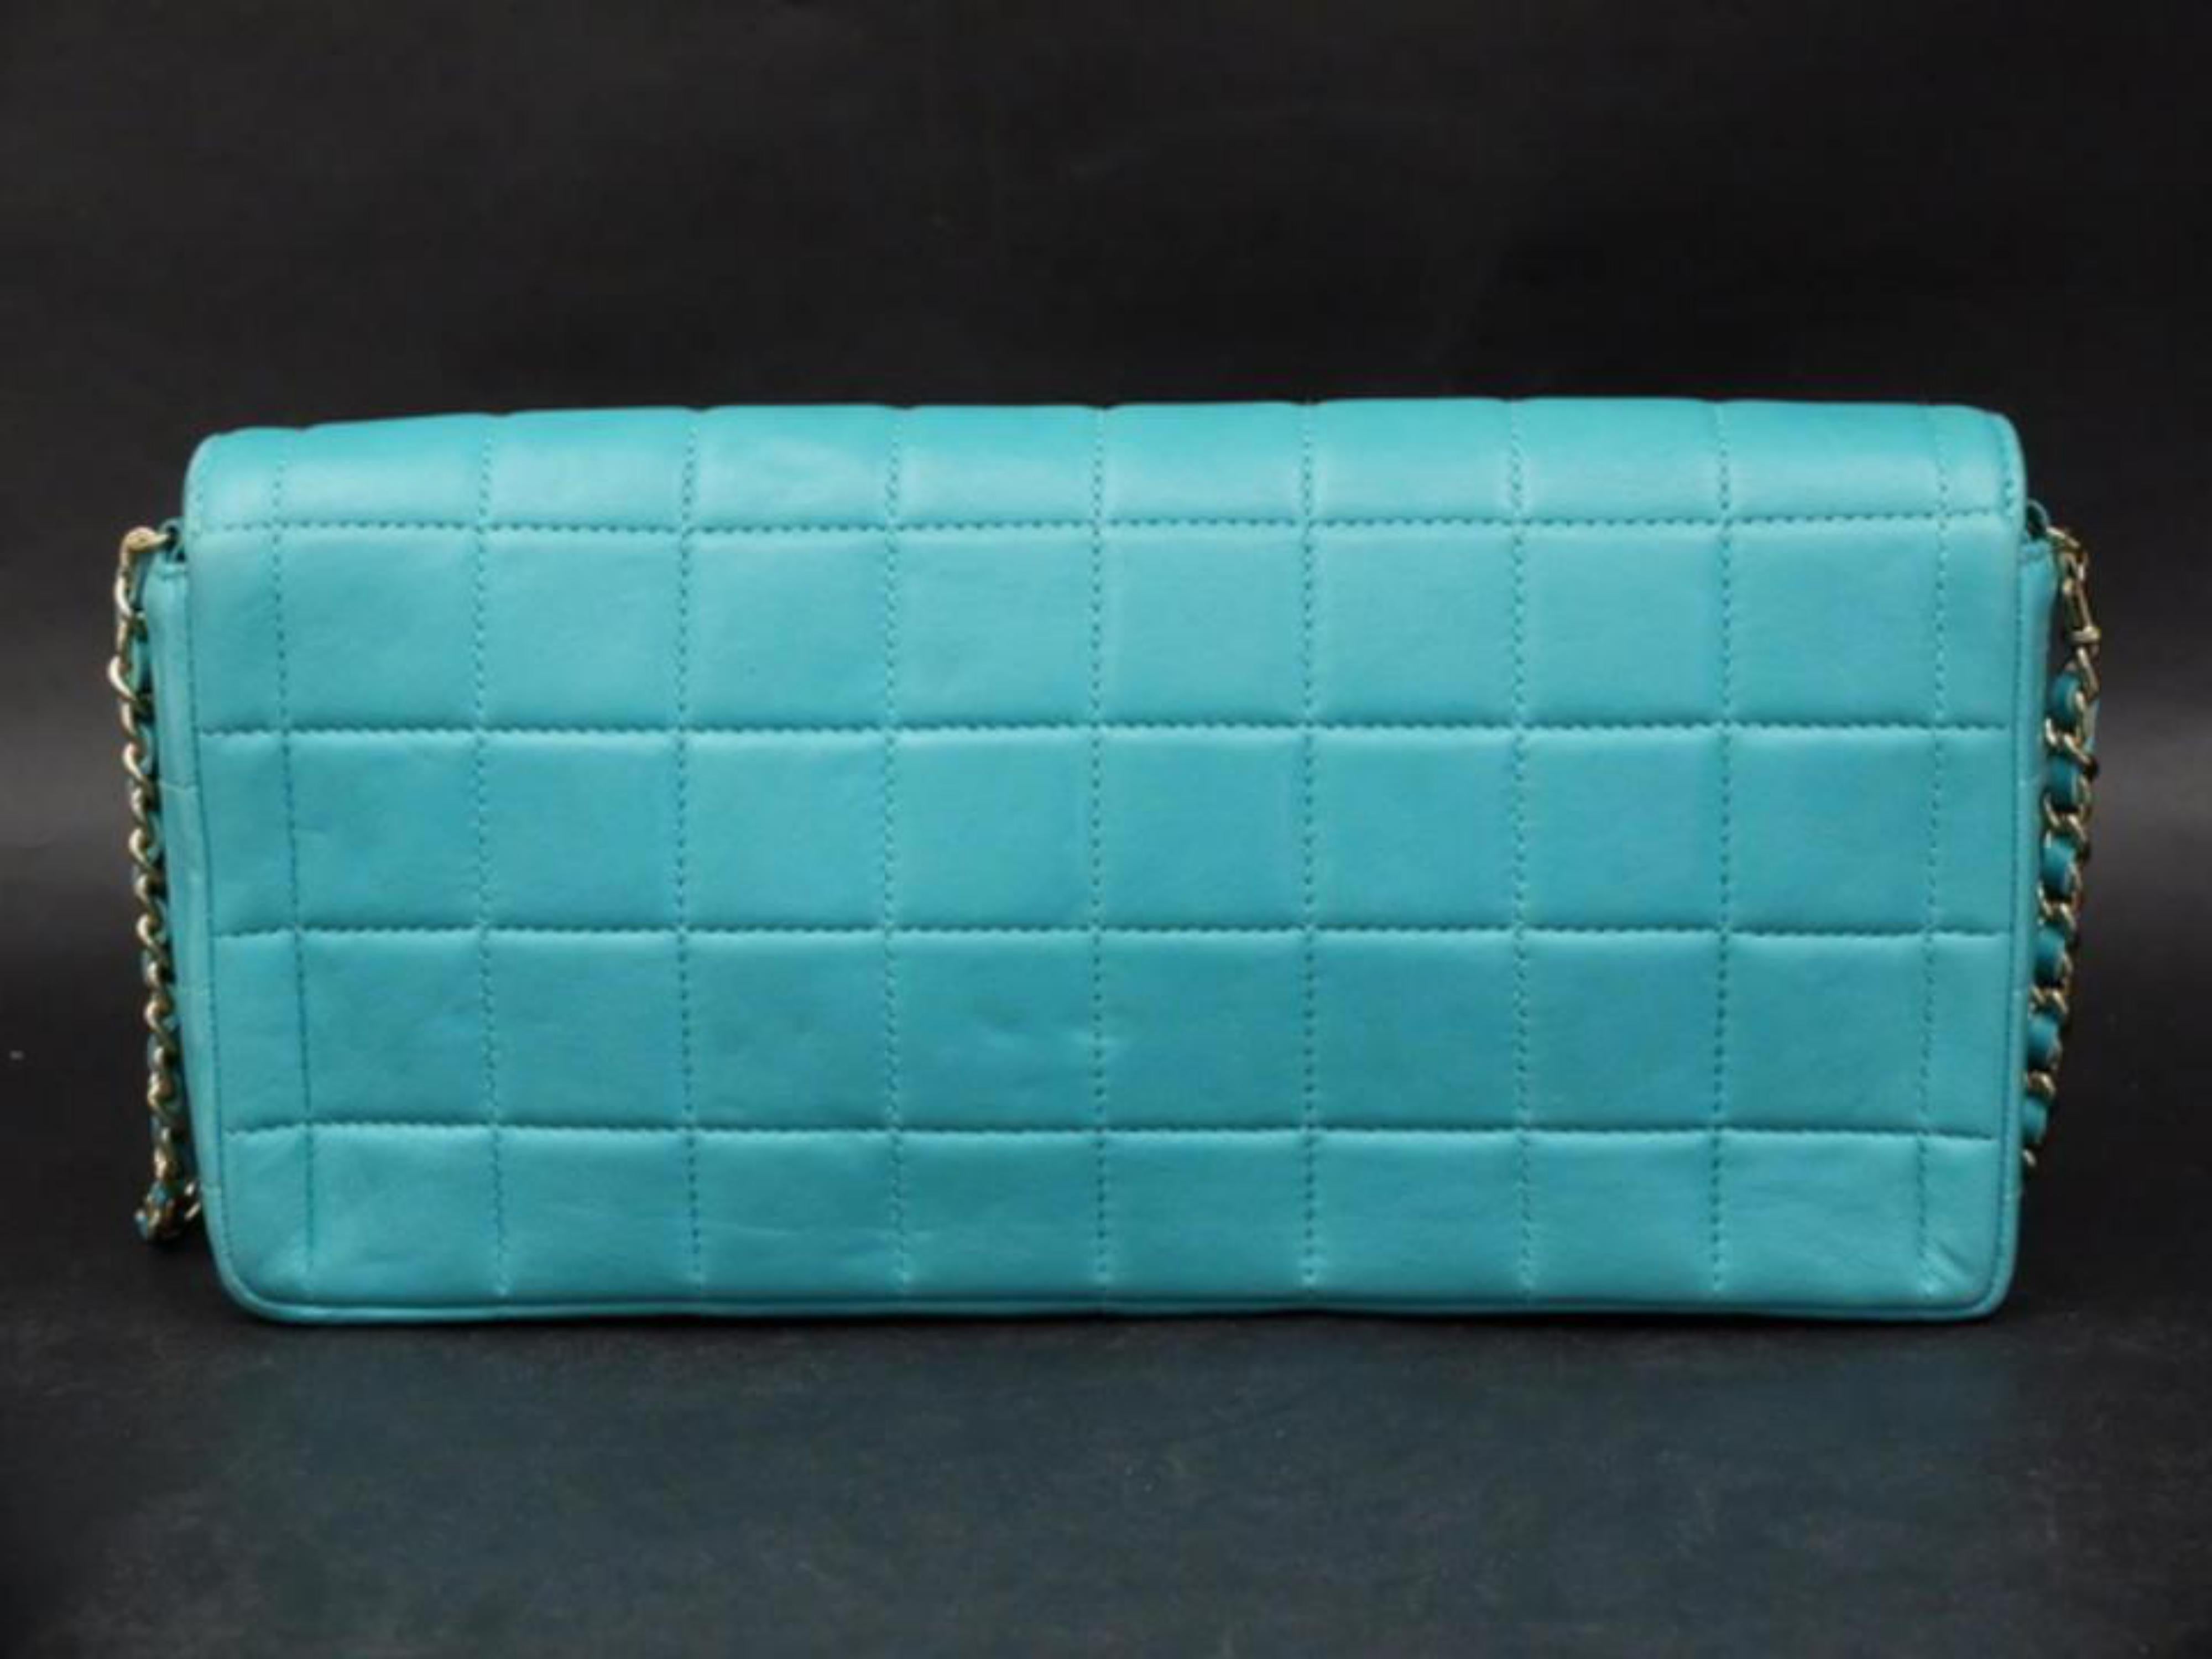 Chanel East West Teal Chocolate Bar Quilted Chain Flap 231201 Shoulder Bag For Sale 2